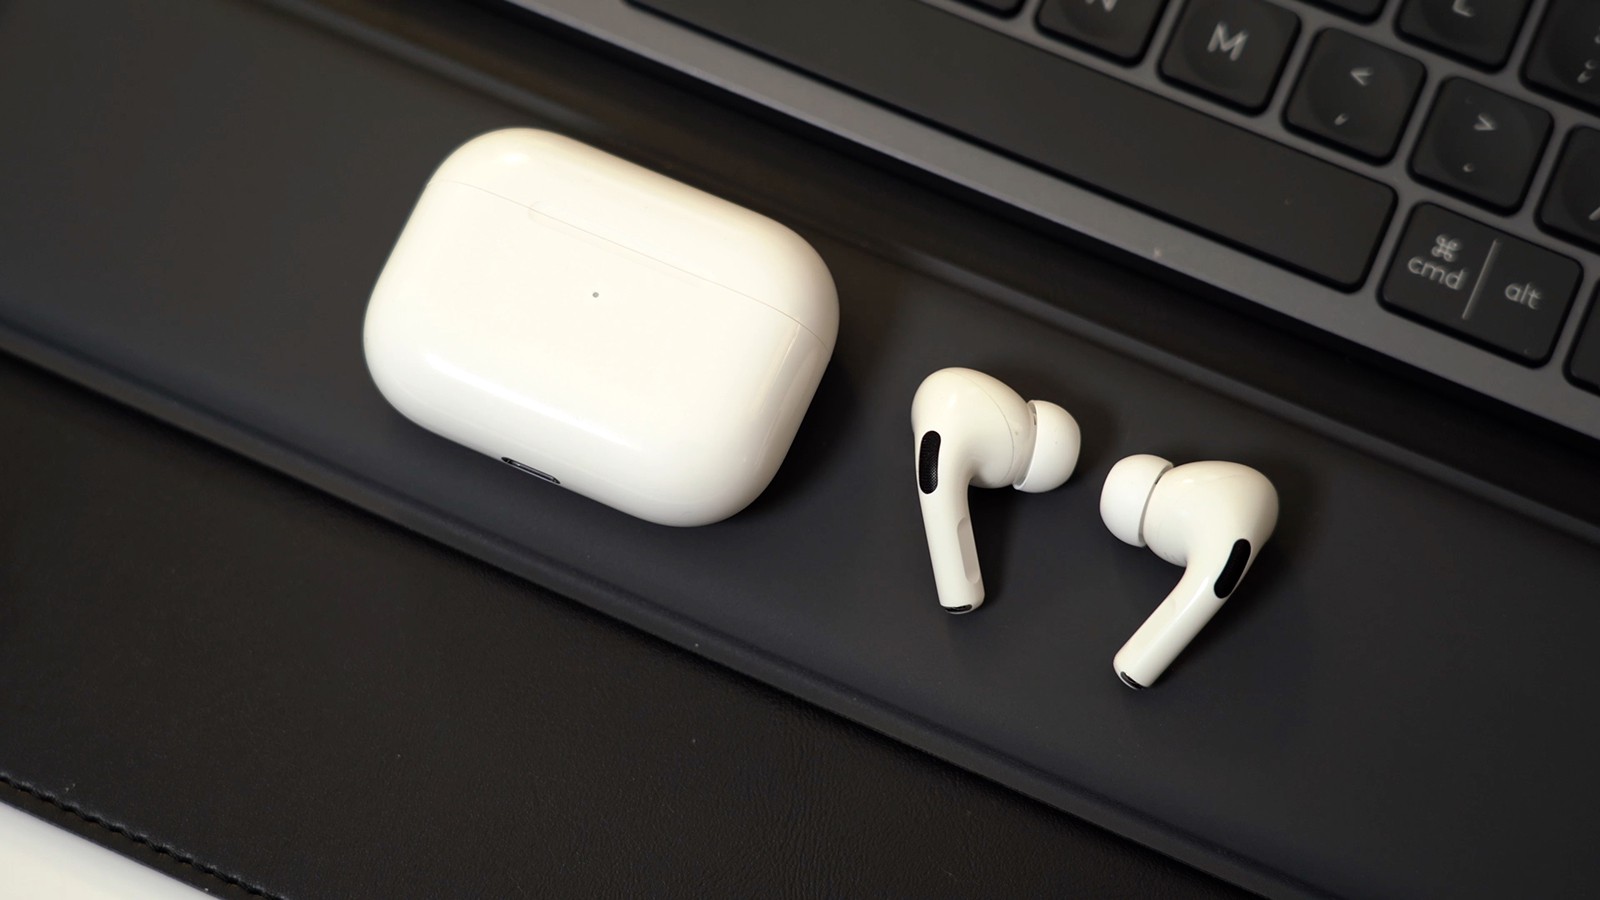 New AirPods Pro and iPhone SE Rumored to Launch in April 2021 - 3uTools